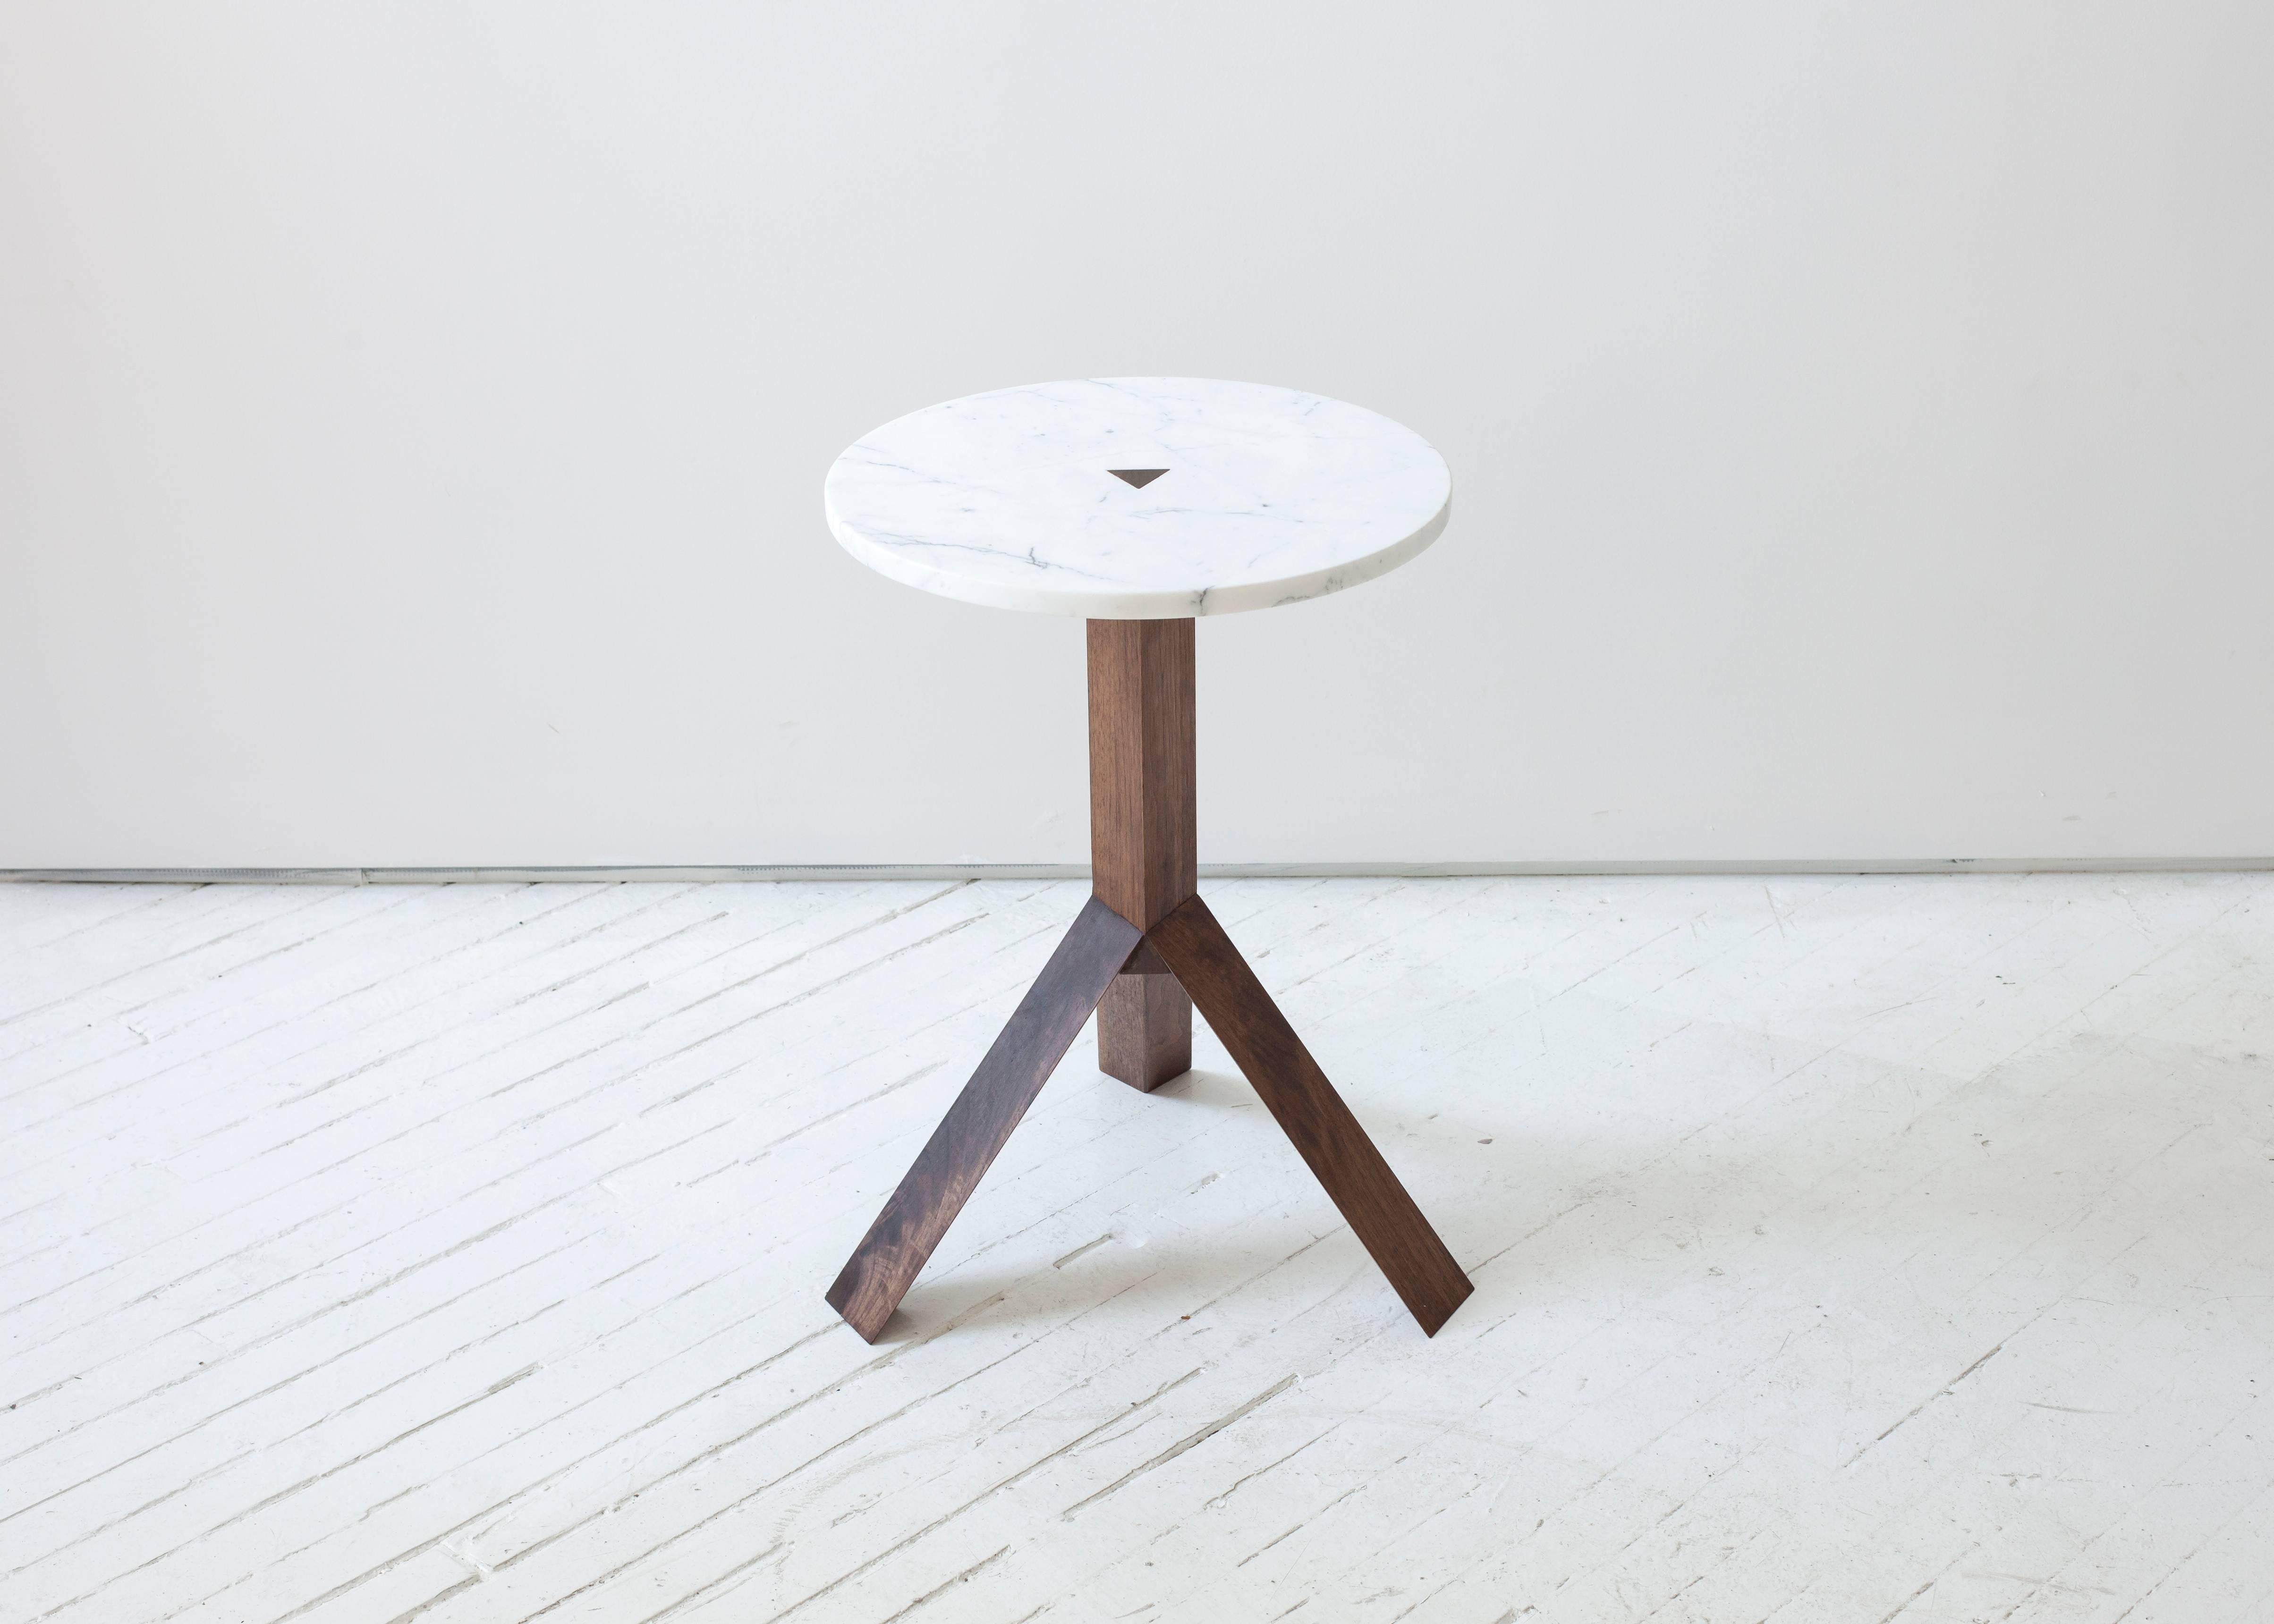 Three angular wood legs split off from a triangular centre post to elevate the small geometric stone tops of this side table. A triangular wood tenon pierces the centre of the table top, communicating the construction and creating a subtle, flush